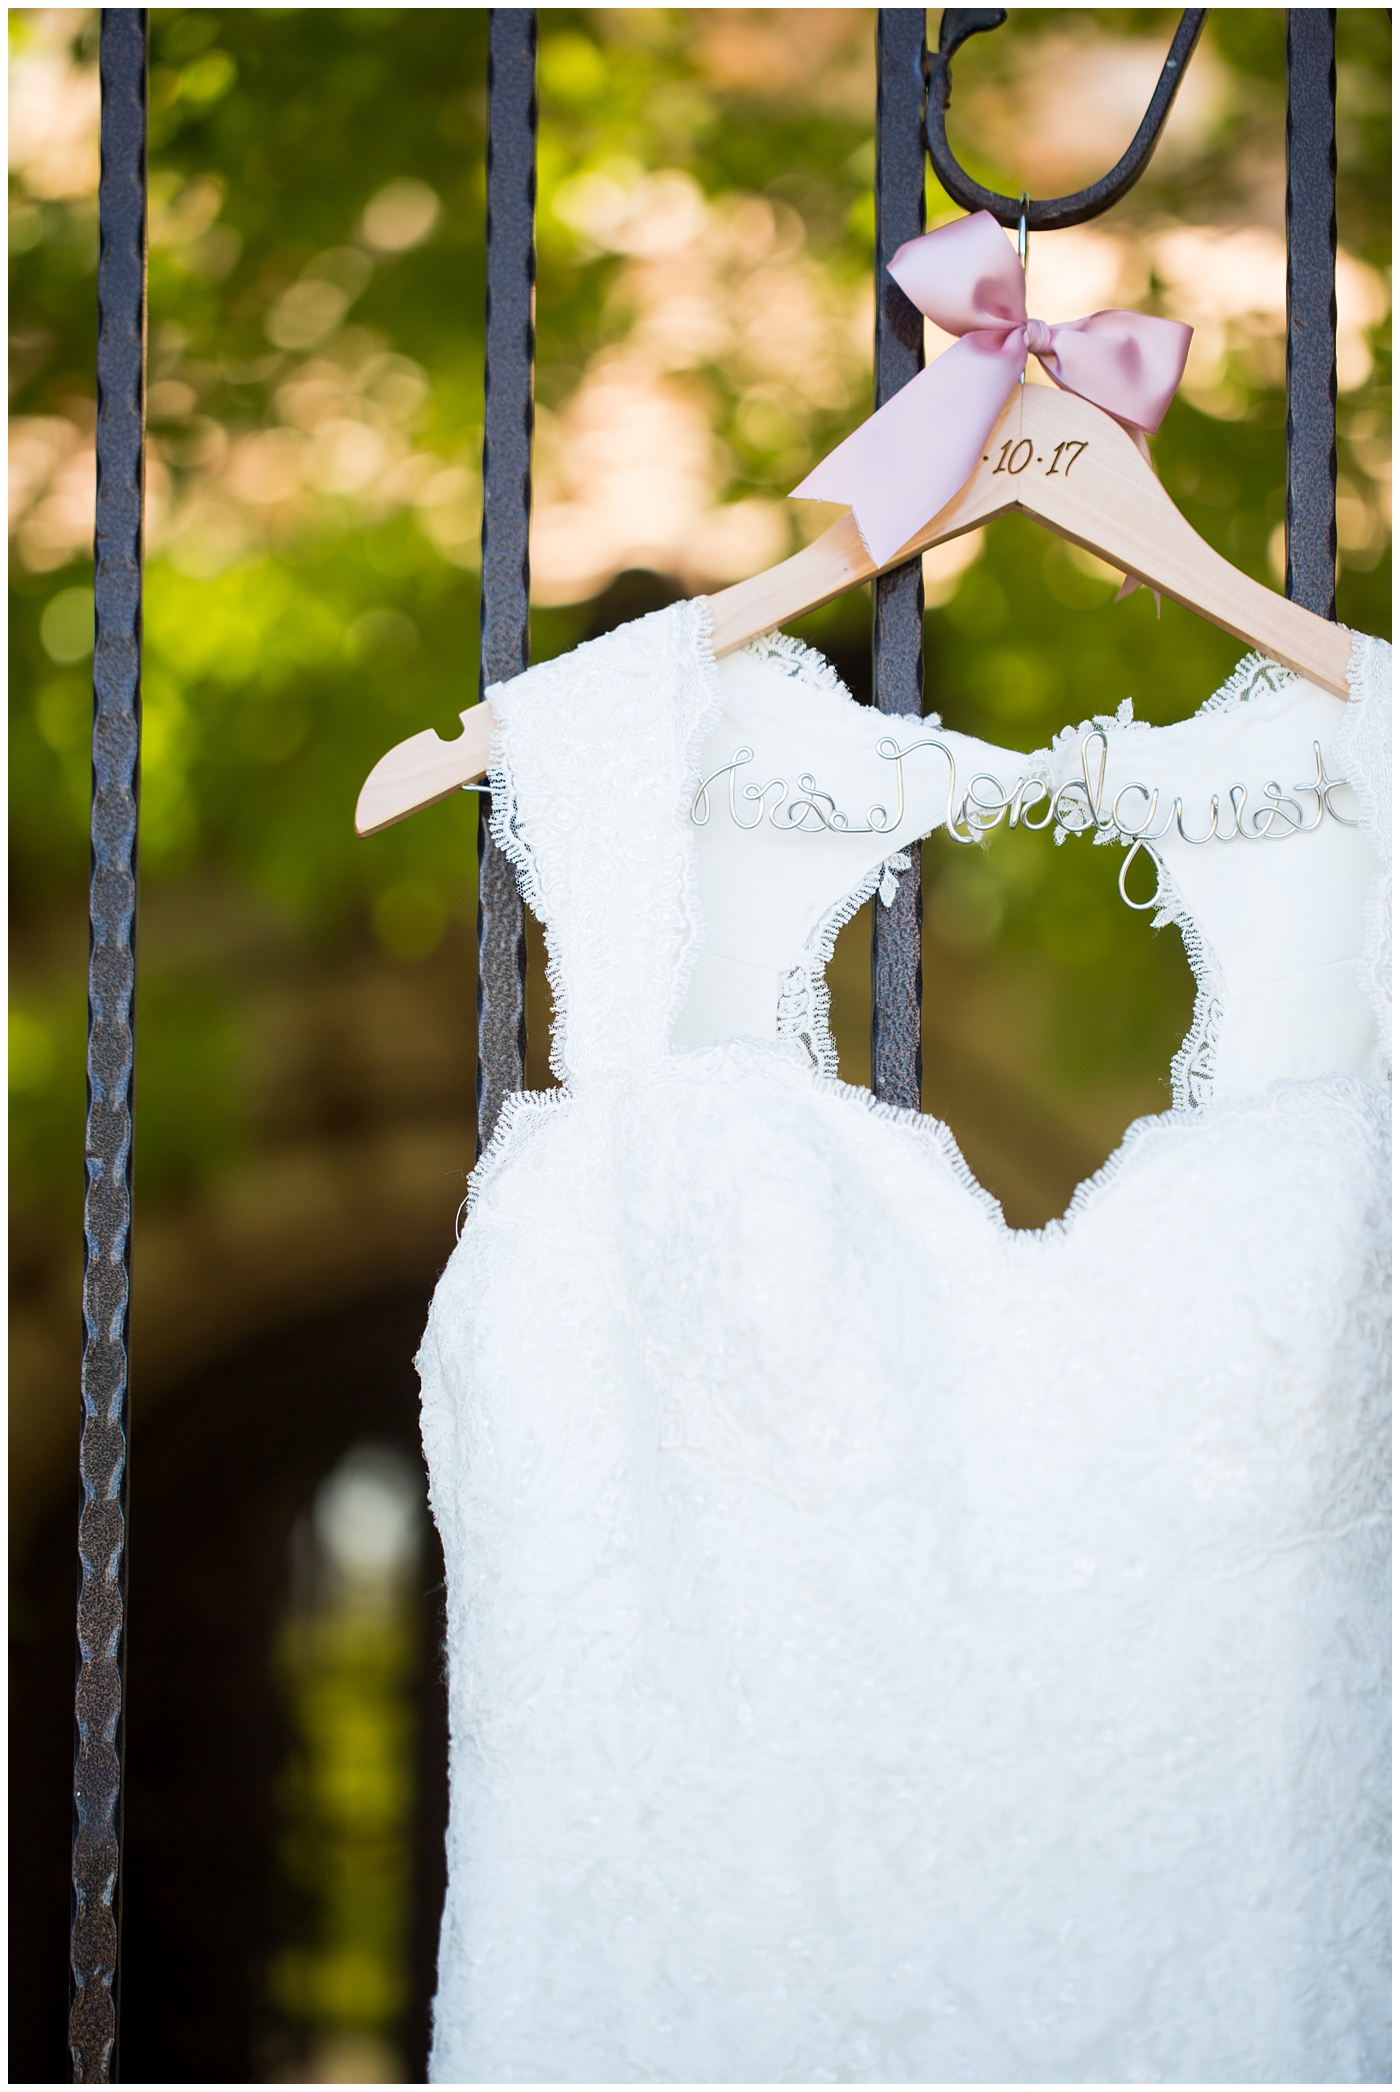 Essense Designs wedding dress with cap sleeves hanging up in arch on custom name hanger